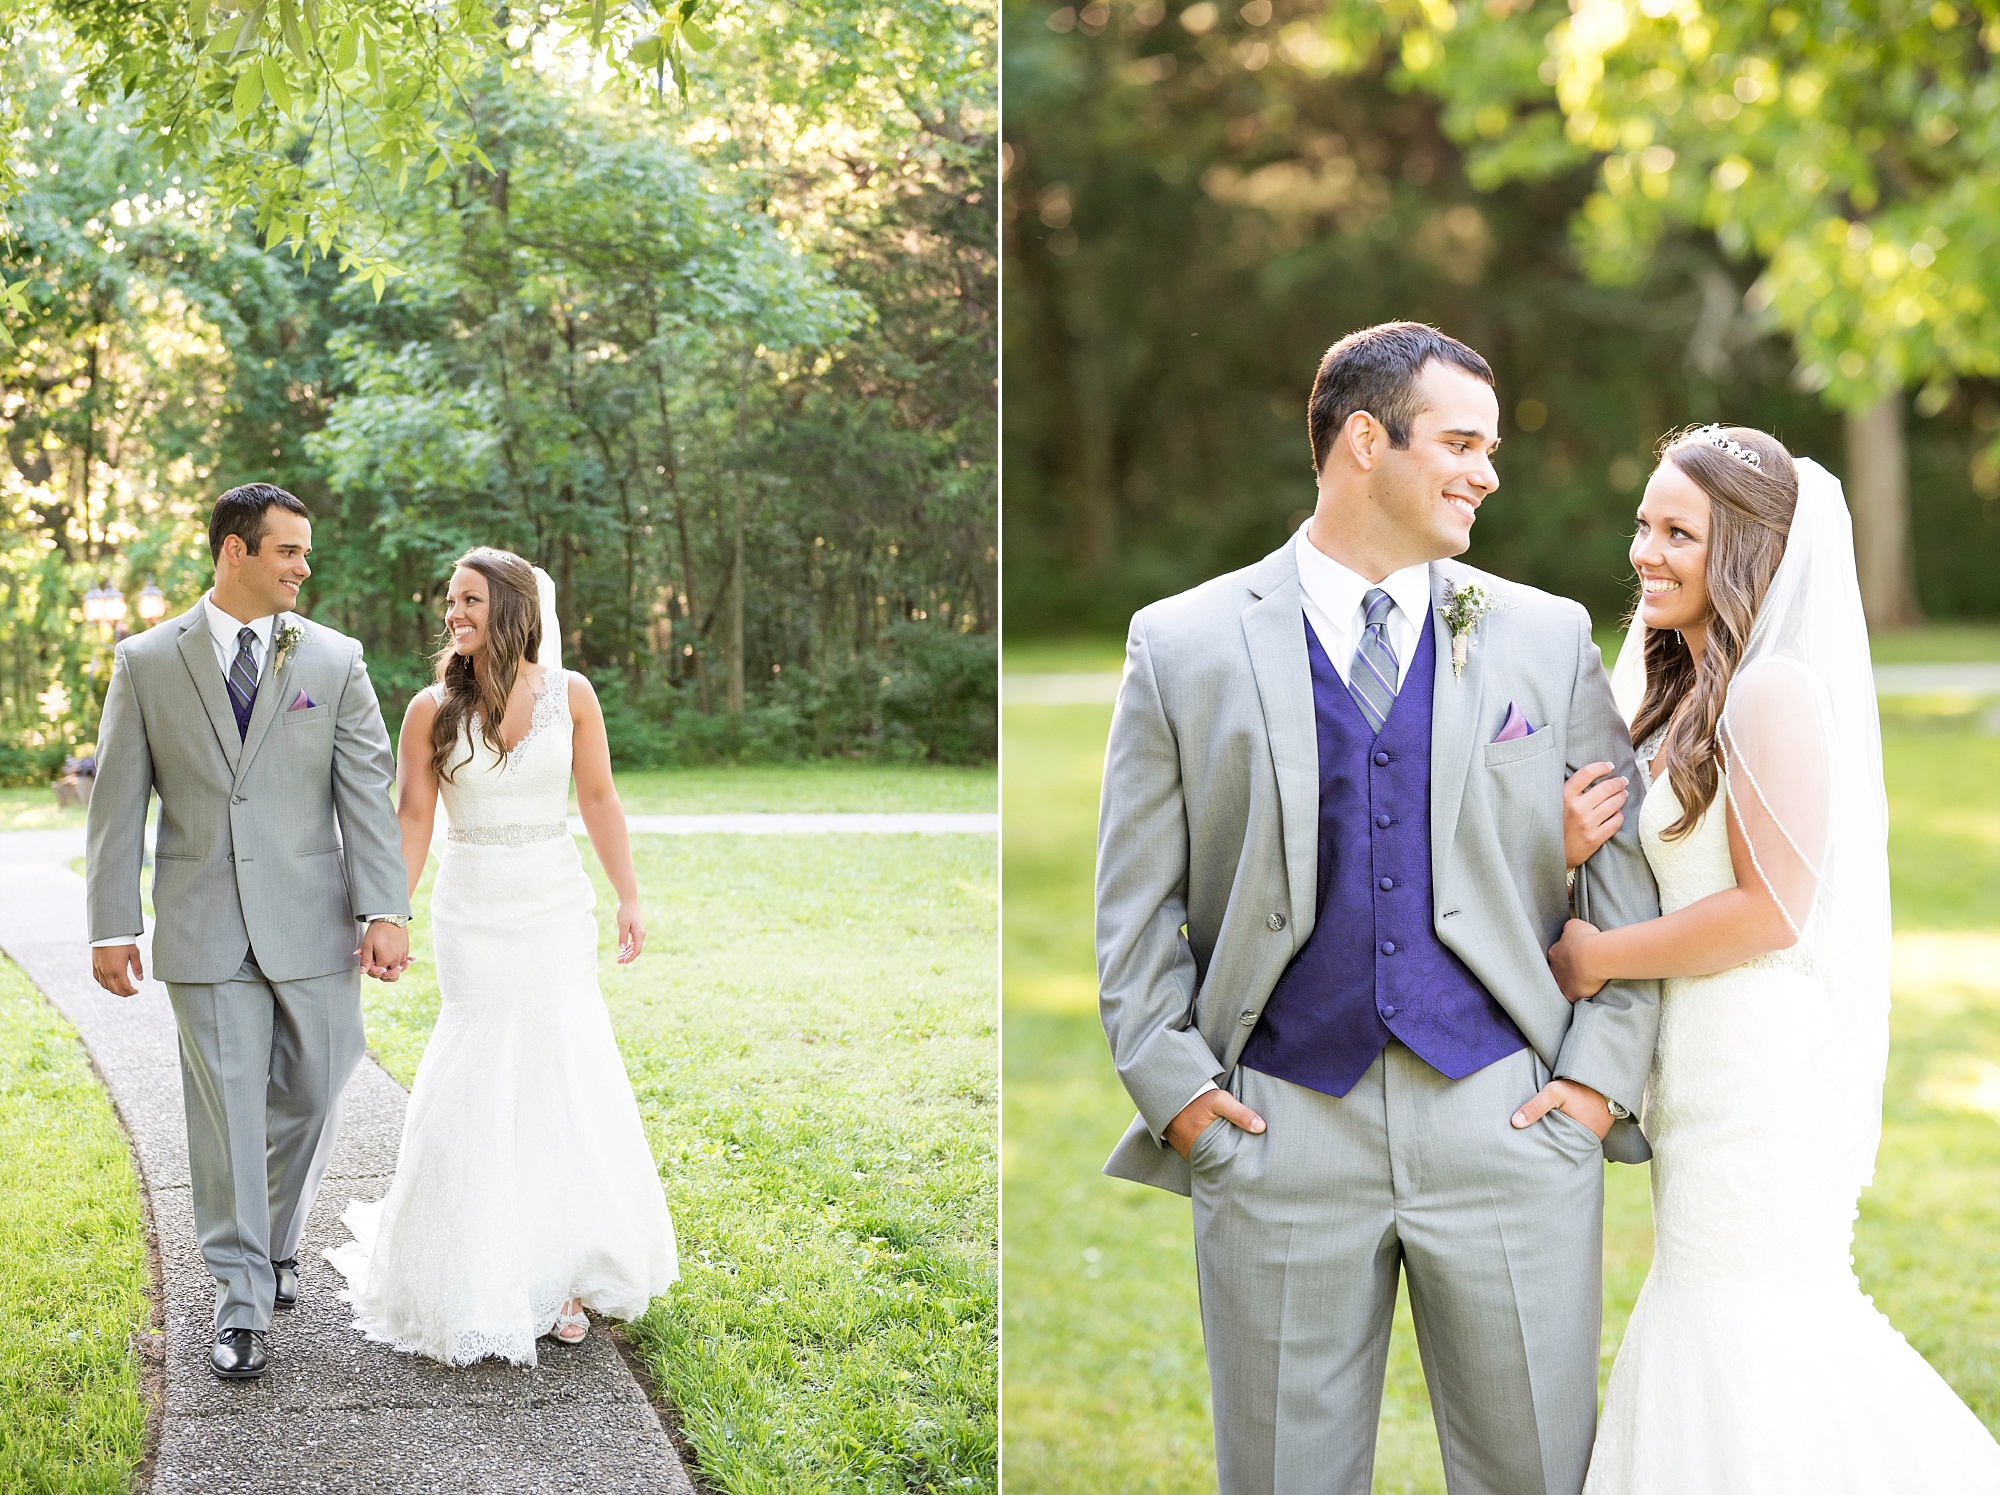 Spring Wedding at Iriswoods in Mount Juliet Tennessee